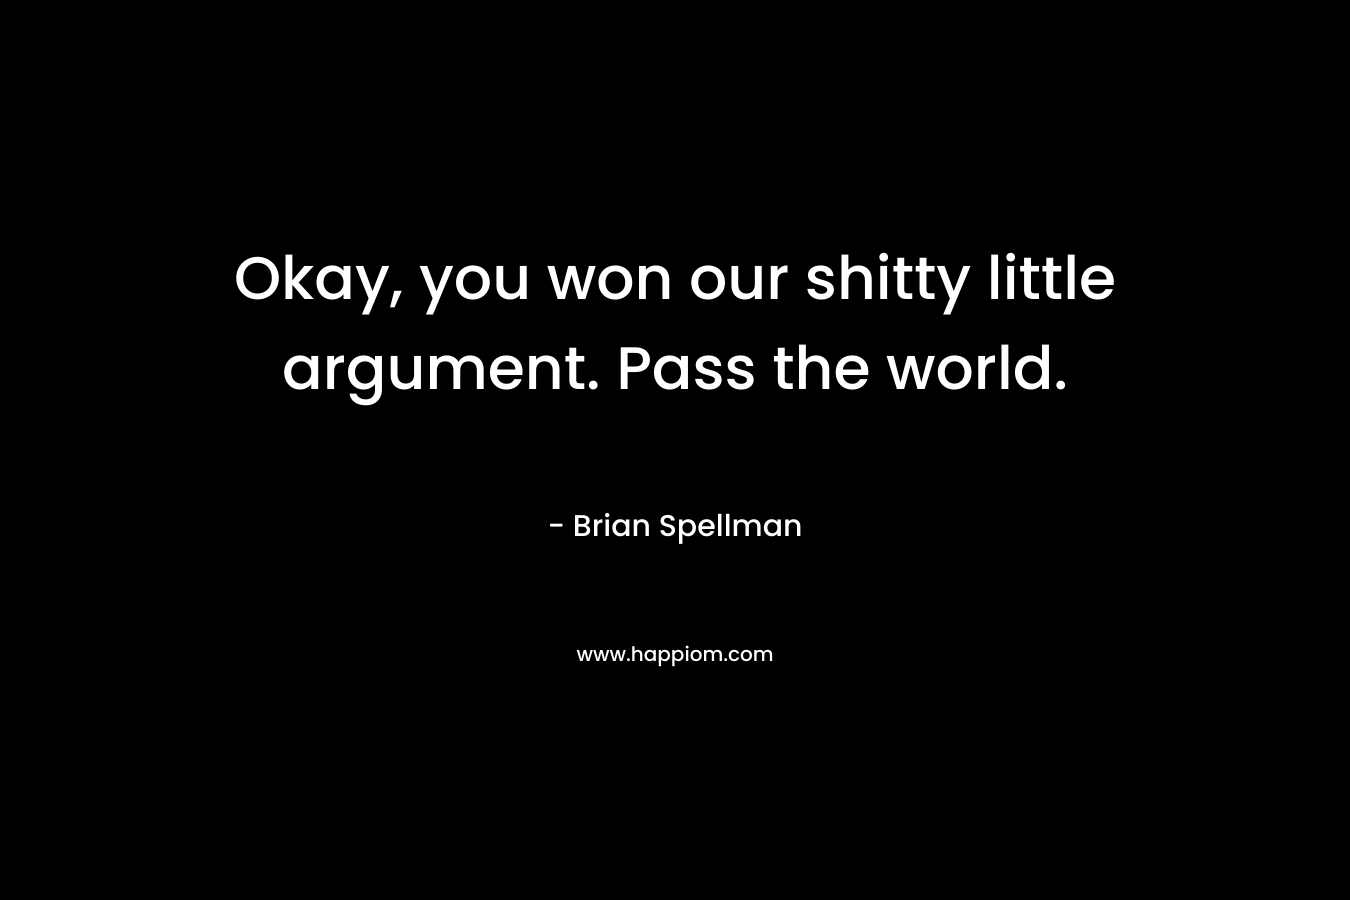 Okay, you won our shitty little argument. Pass the world.